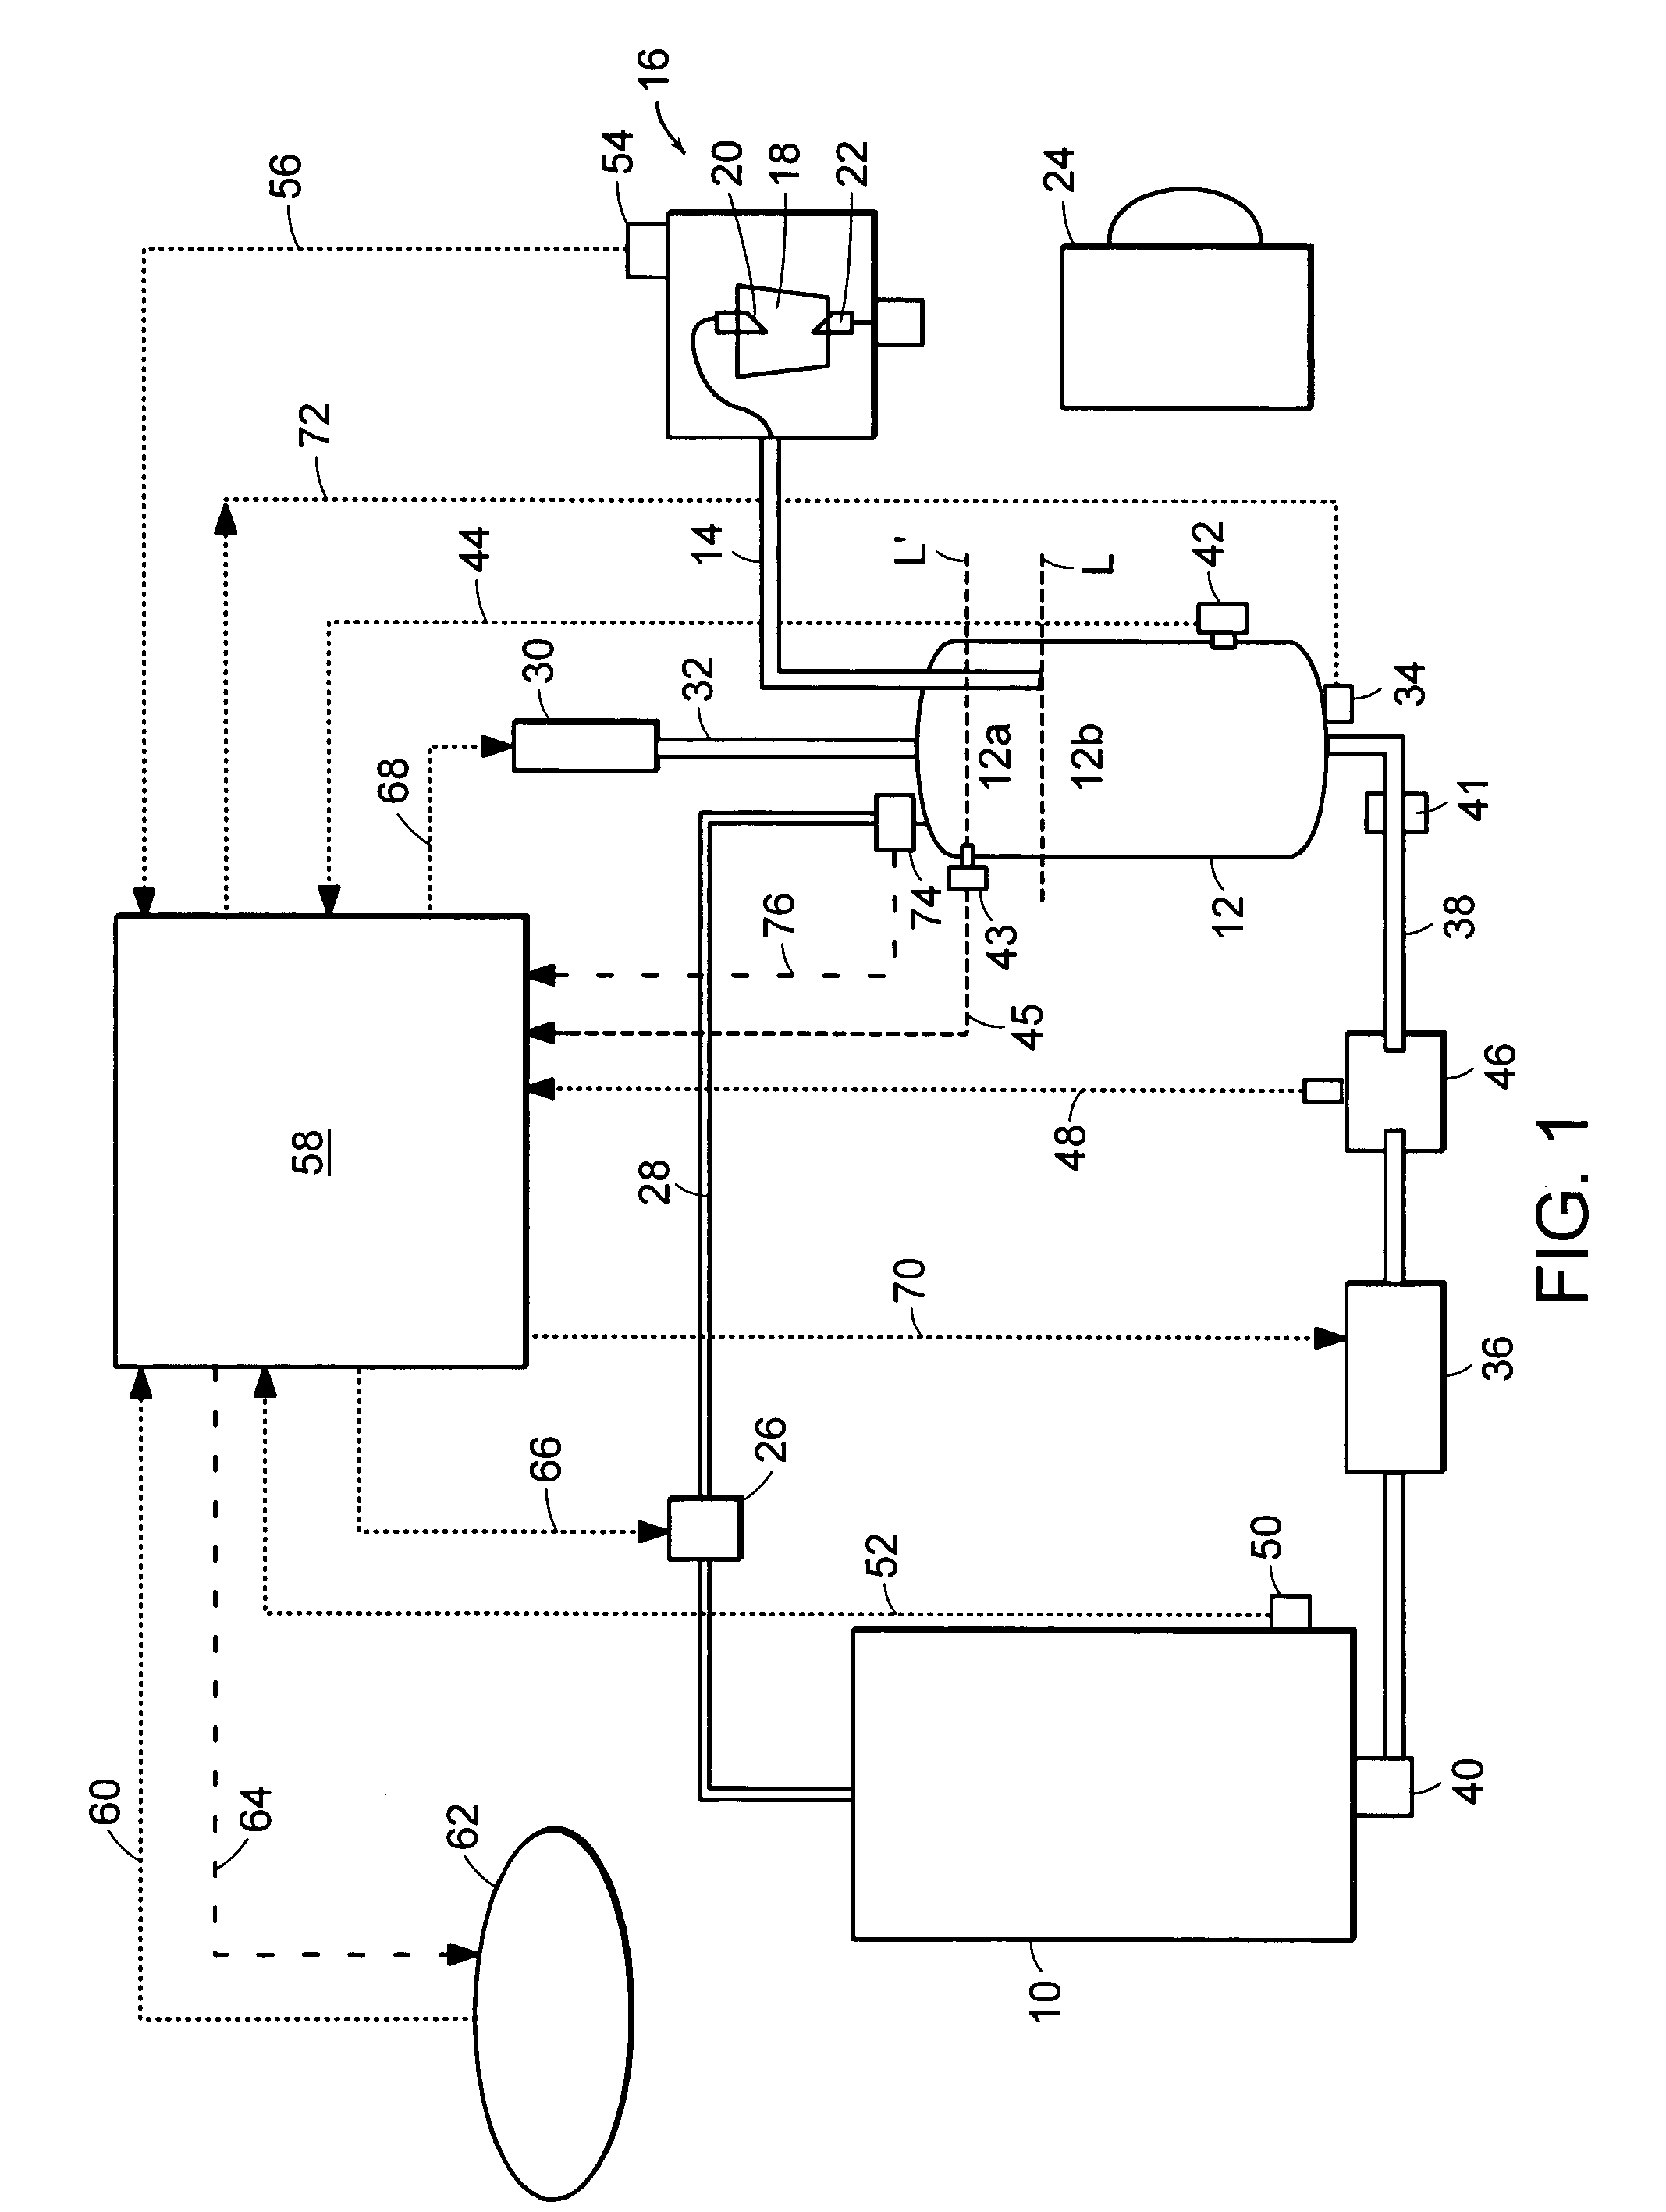 System for dispensing metered volumes of heated water to the brew chamber of a single serve beverage brewer